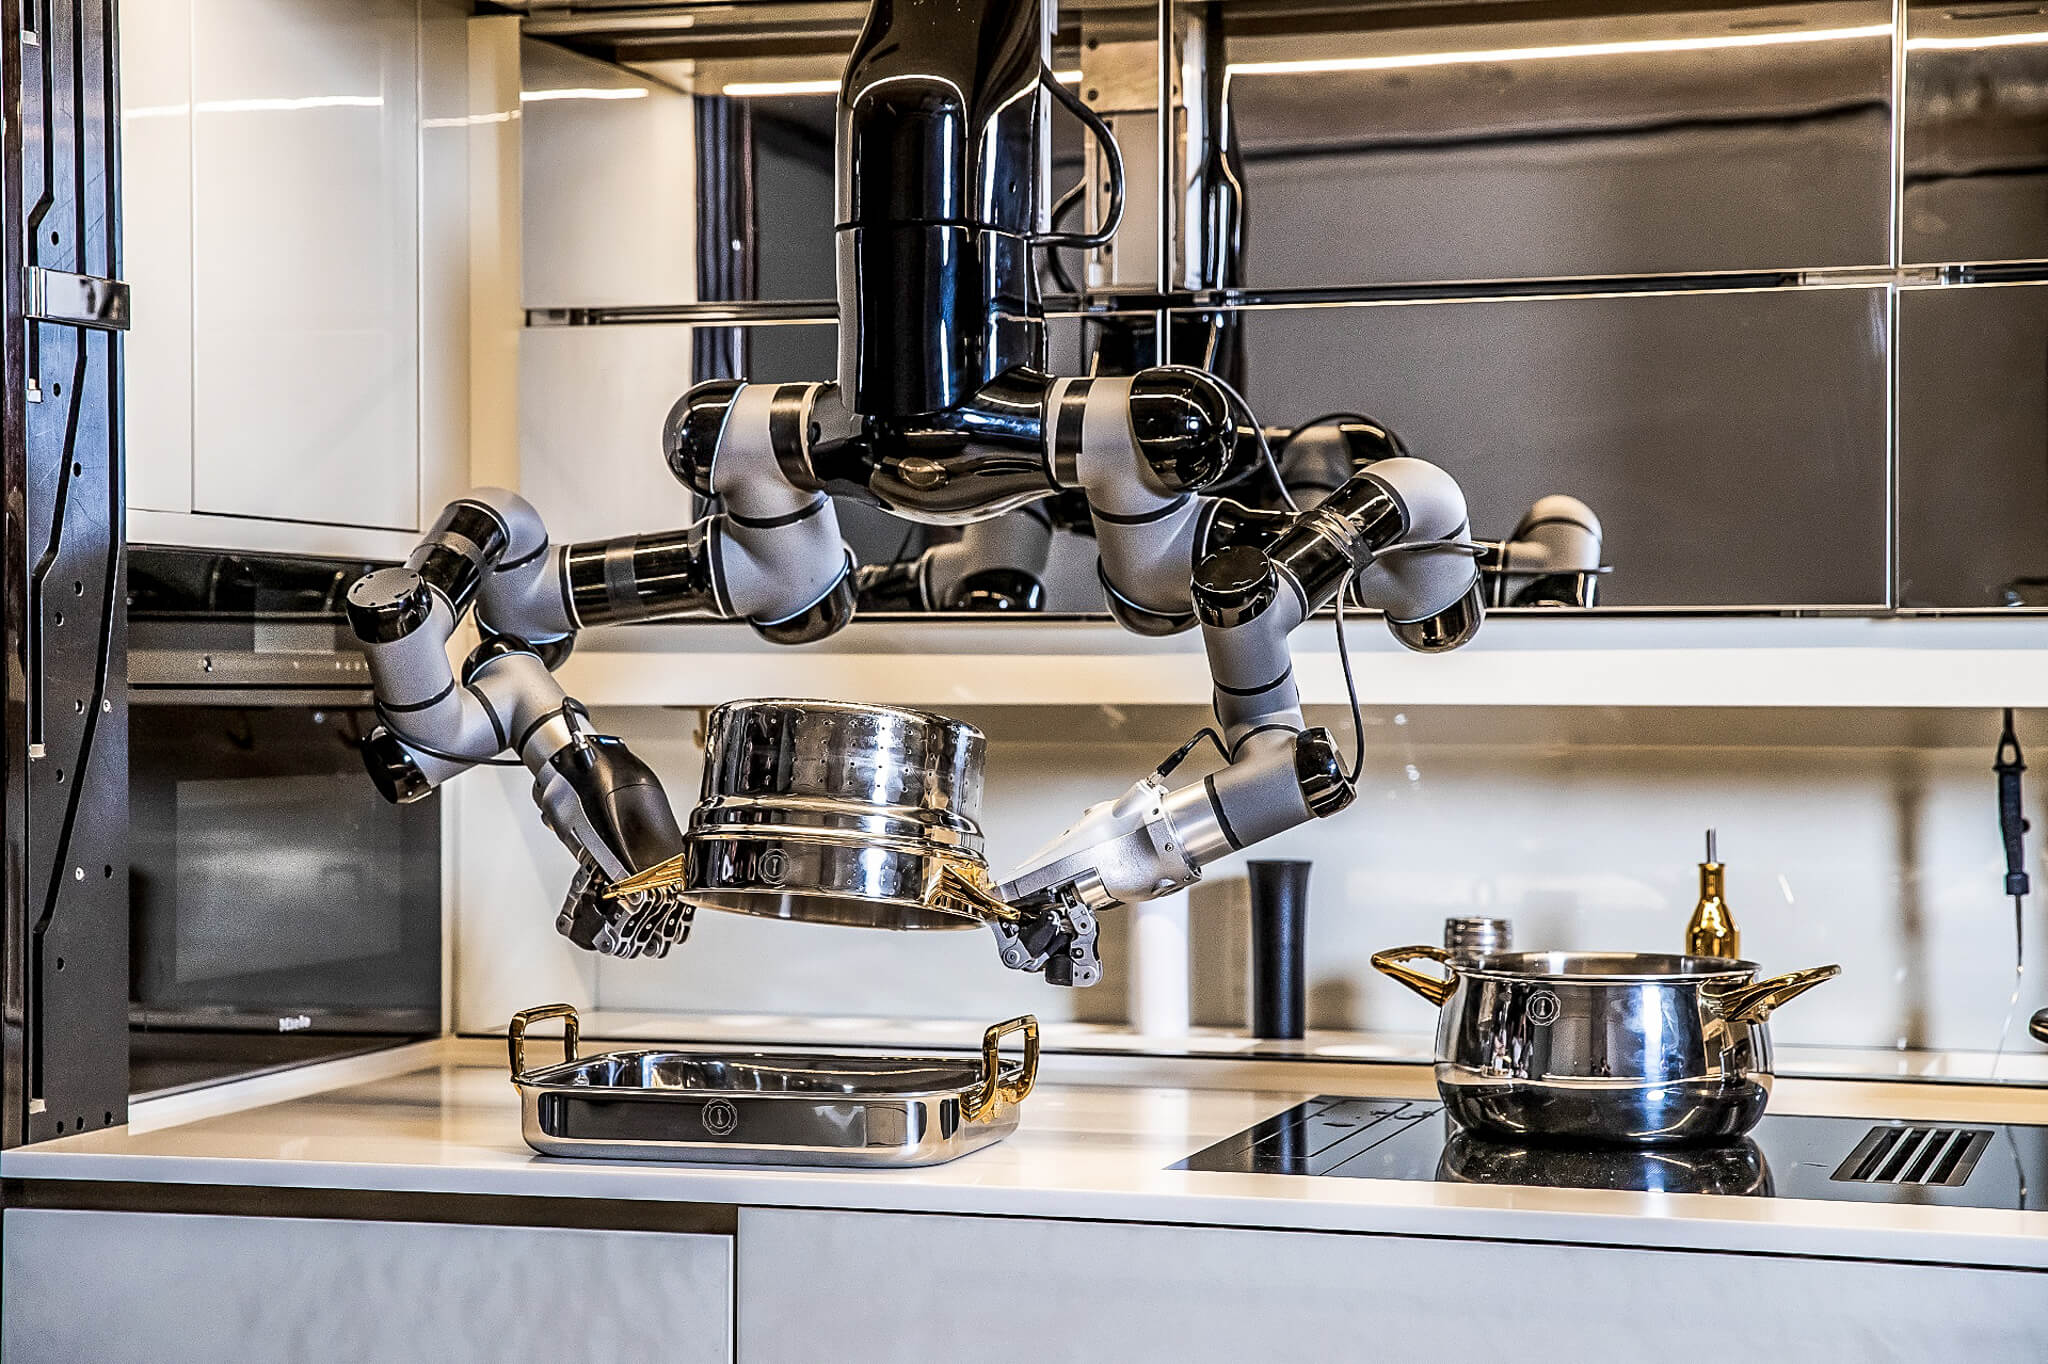 Automation, not only in the direction of robotics, has been firmly established in the foodservice industry for years